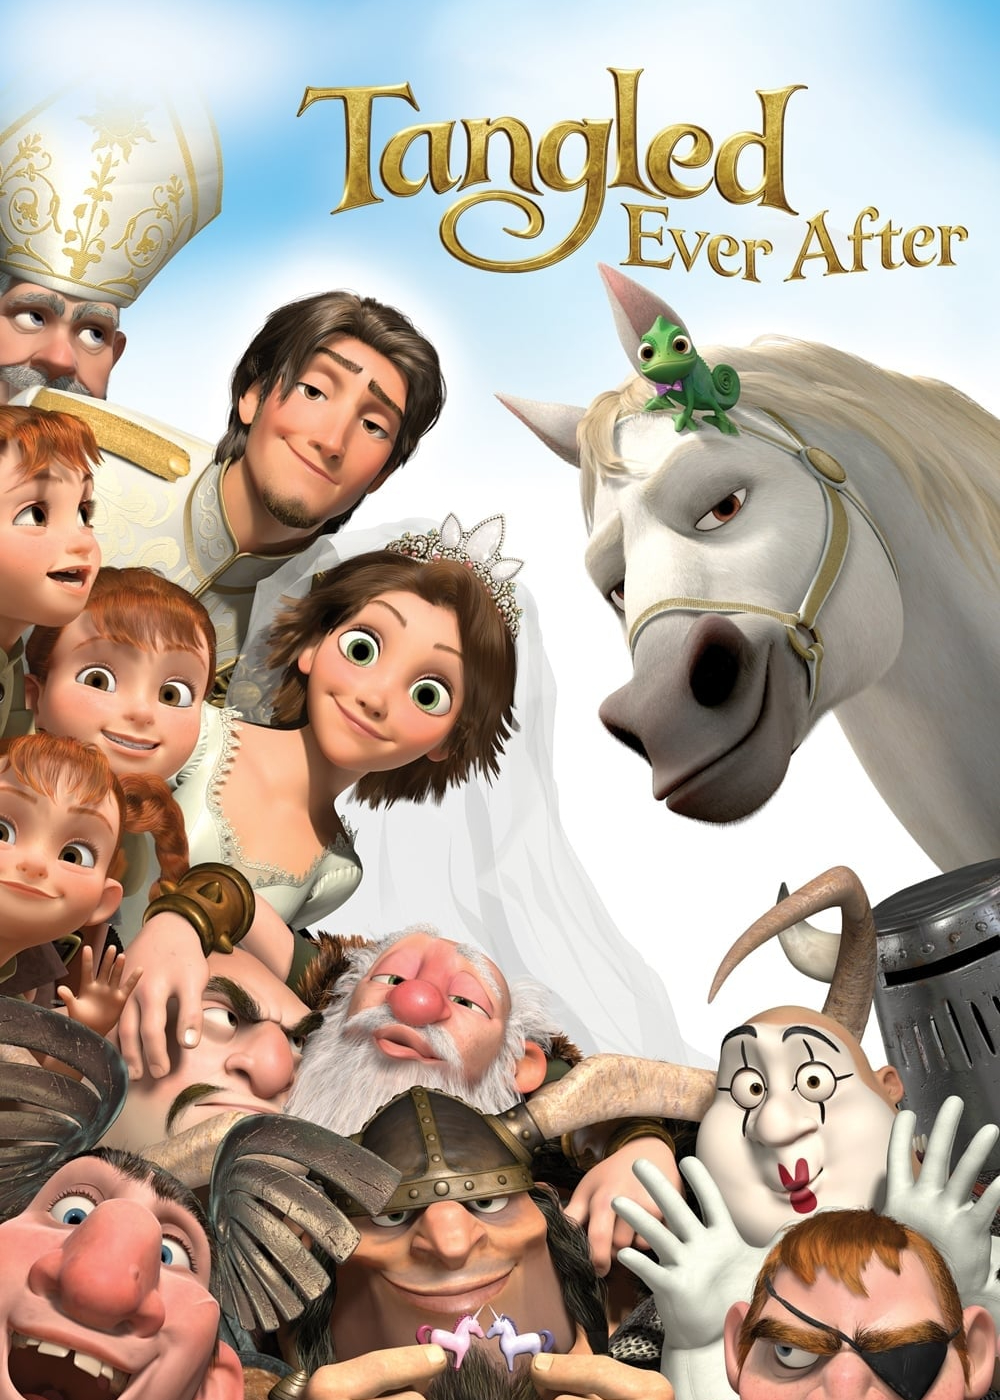 Tangled Ever After - Tangled Ever After